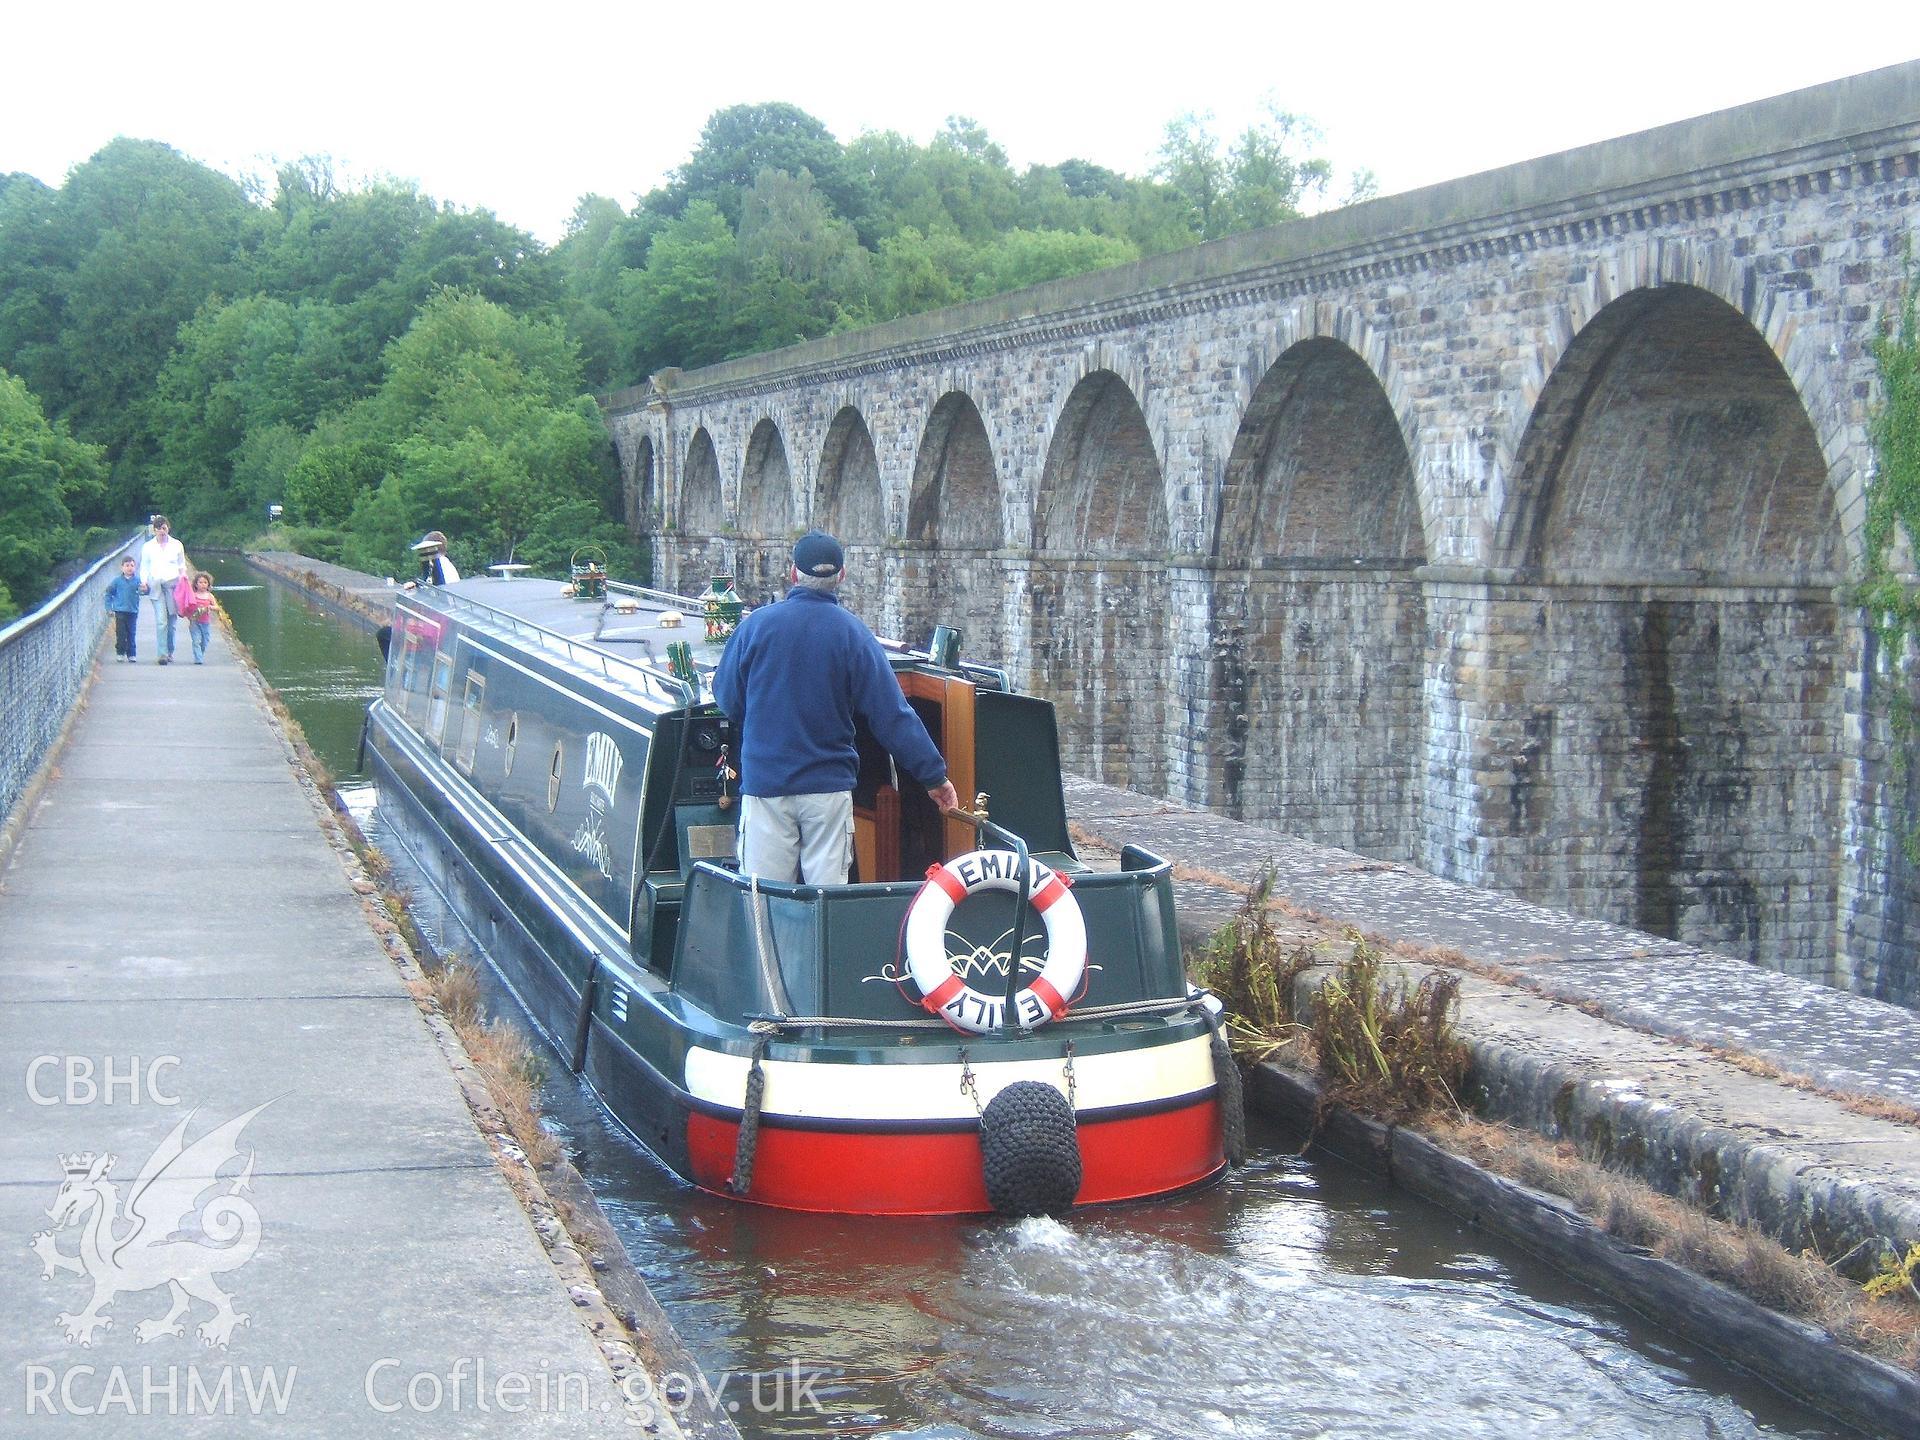 North-east elevation of viaduct looking south from aqueduct deck with boat.